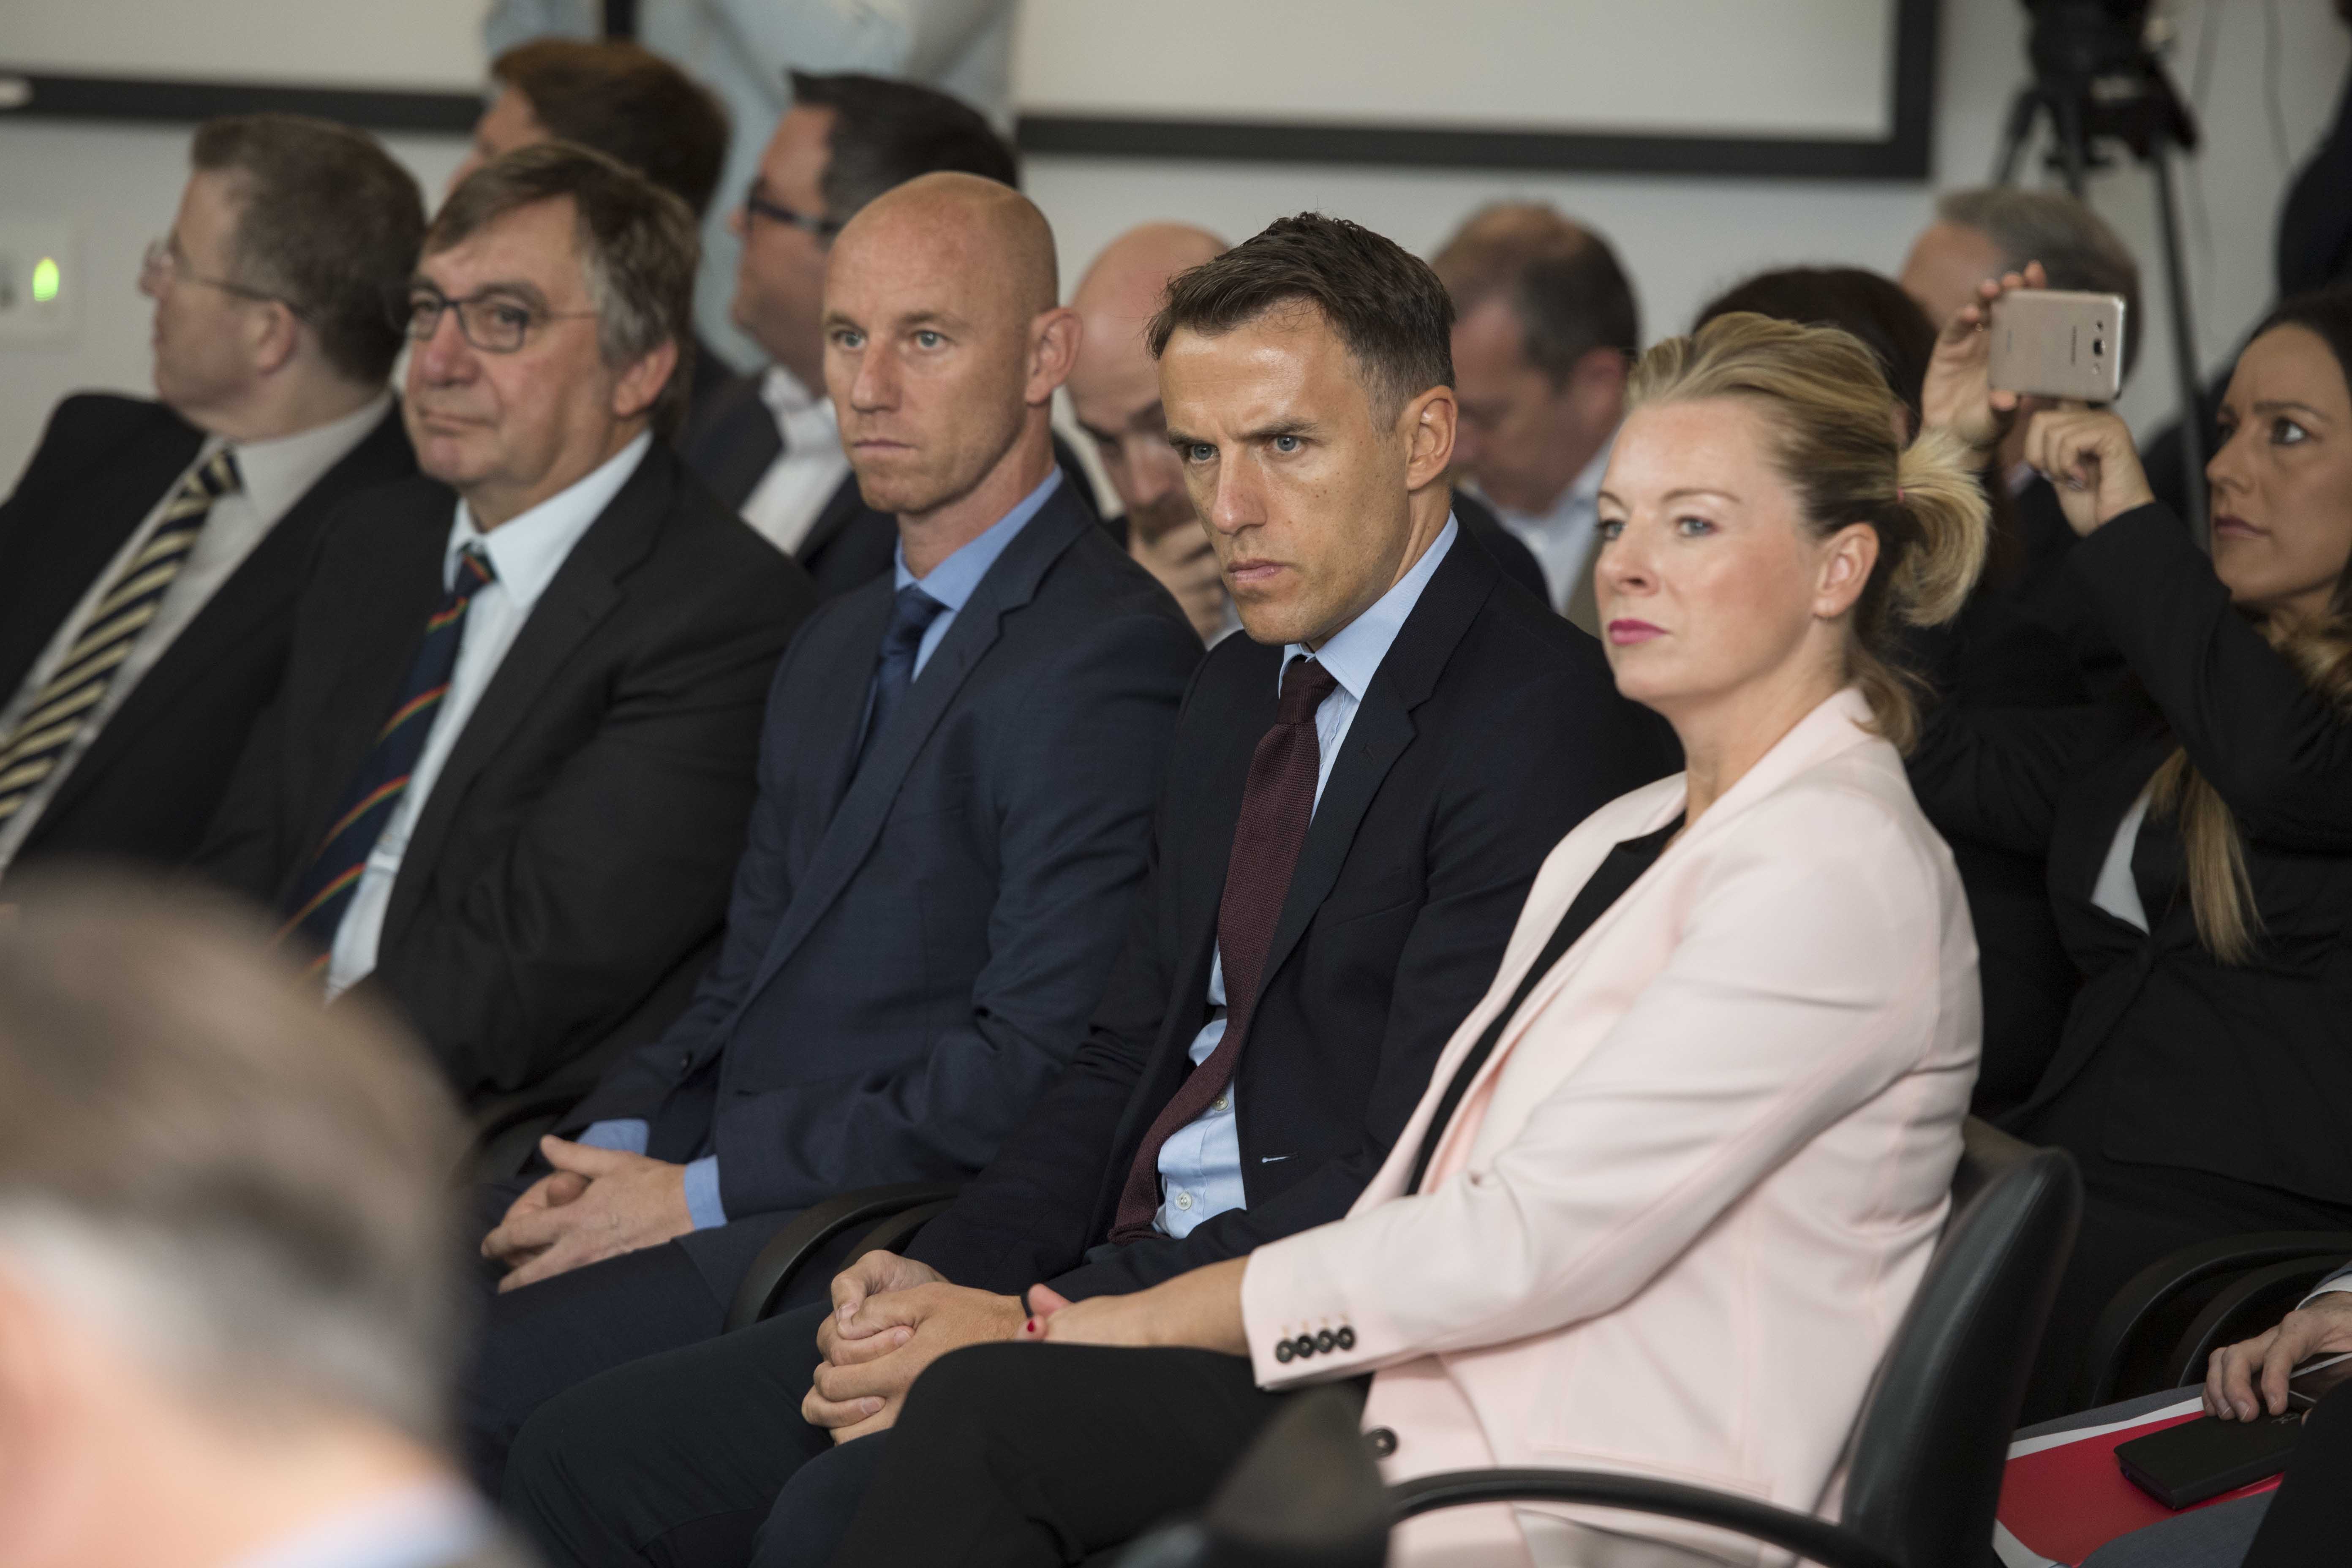 Former Manchester United footballers Nicky Butt (third from left) and Phil Neville (fourth from left) were also at the launch